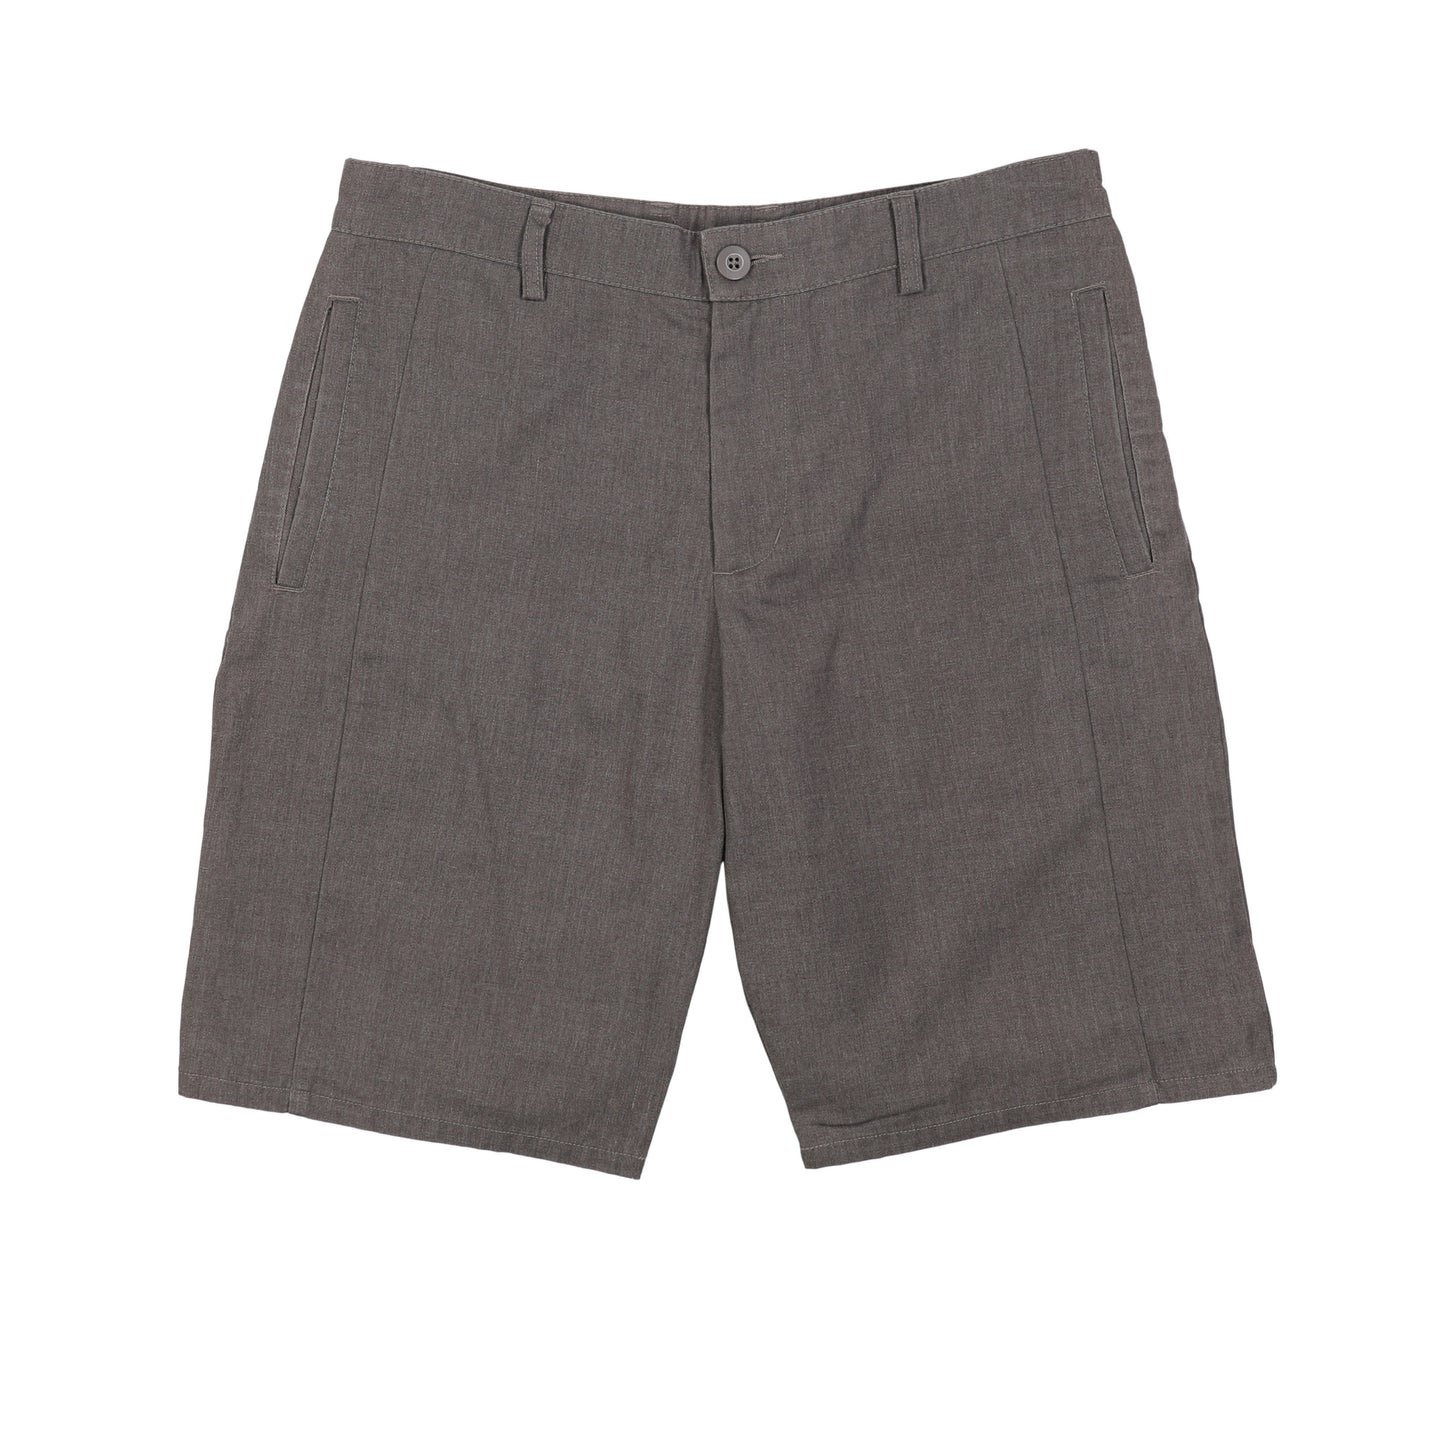 M's Delivery Shorts